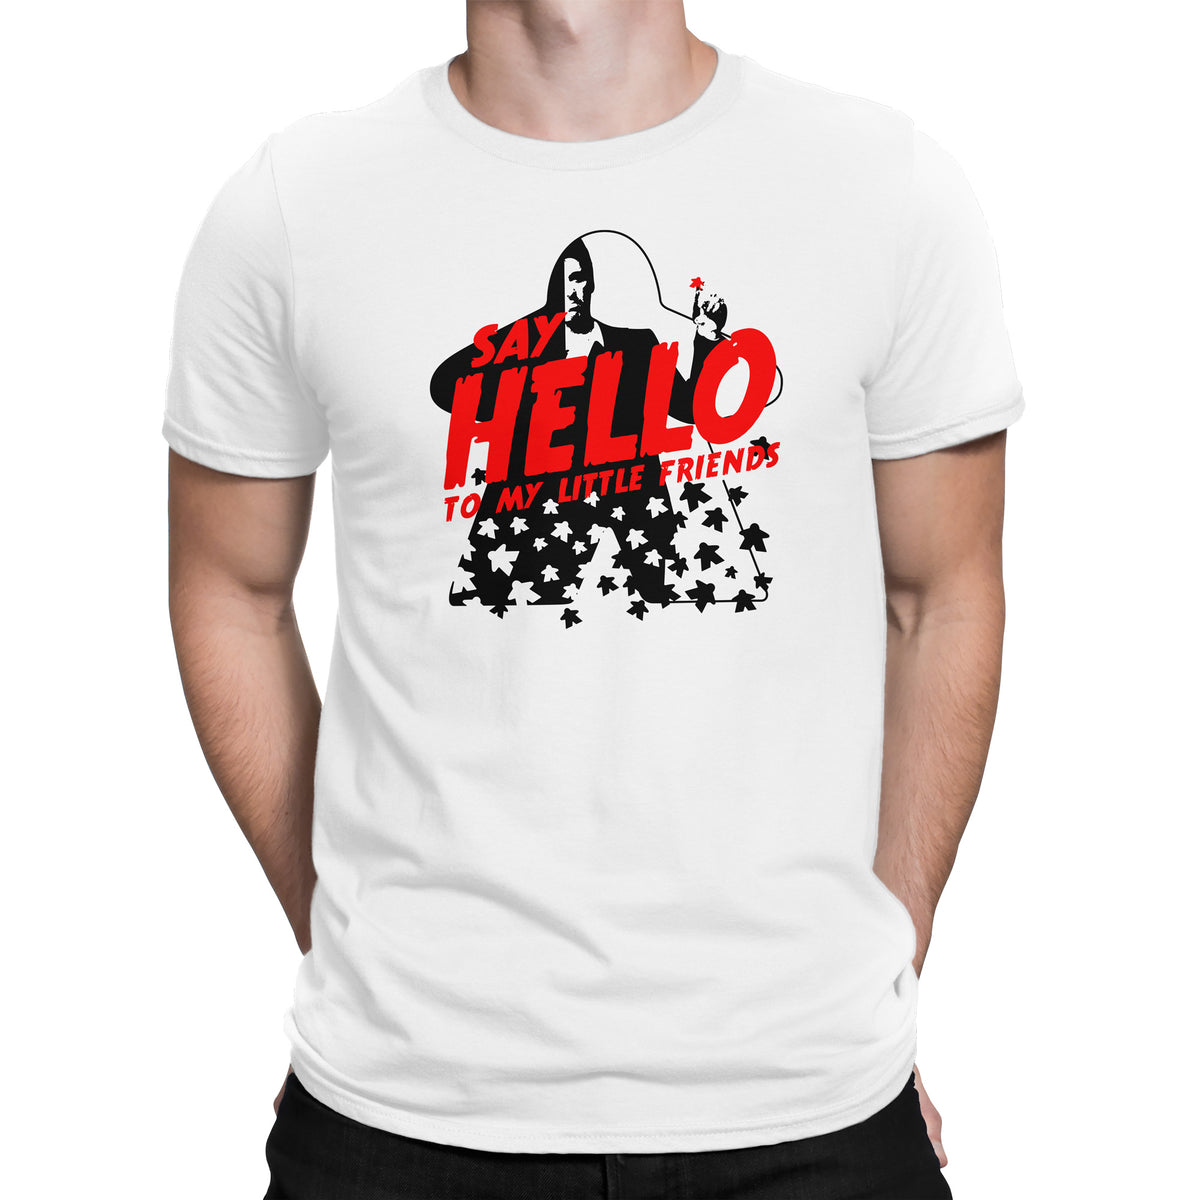 Say Hello to My Little Friends Board Game T-Shirt on a Model